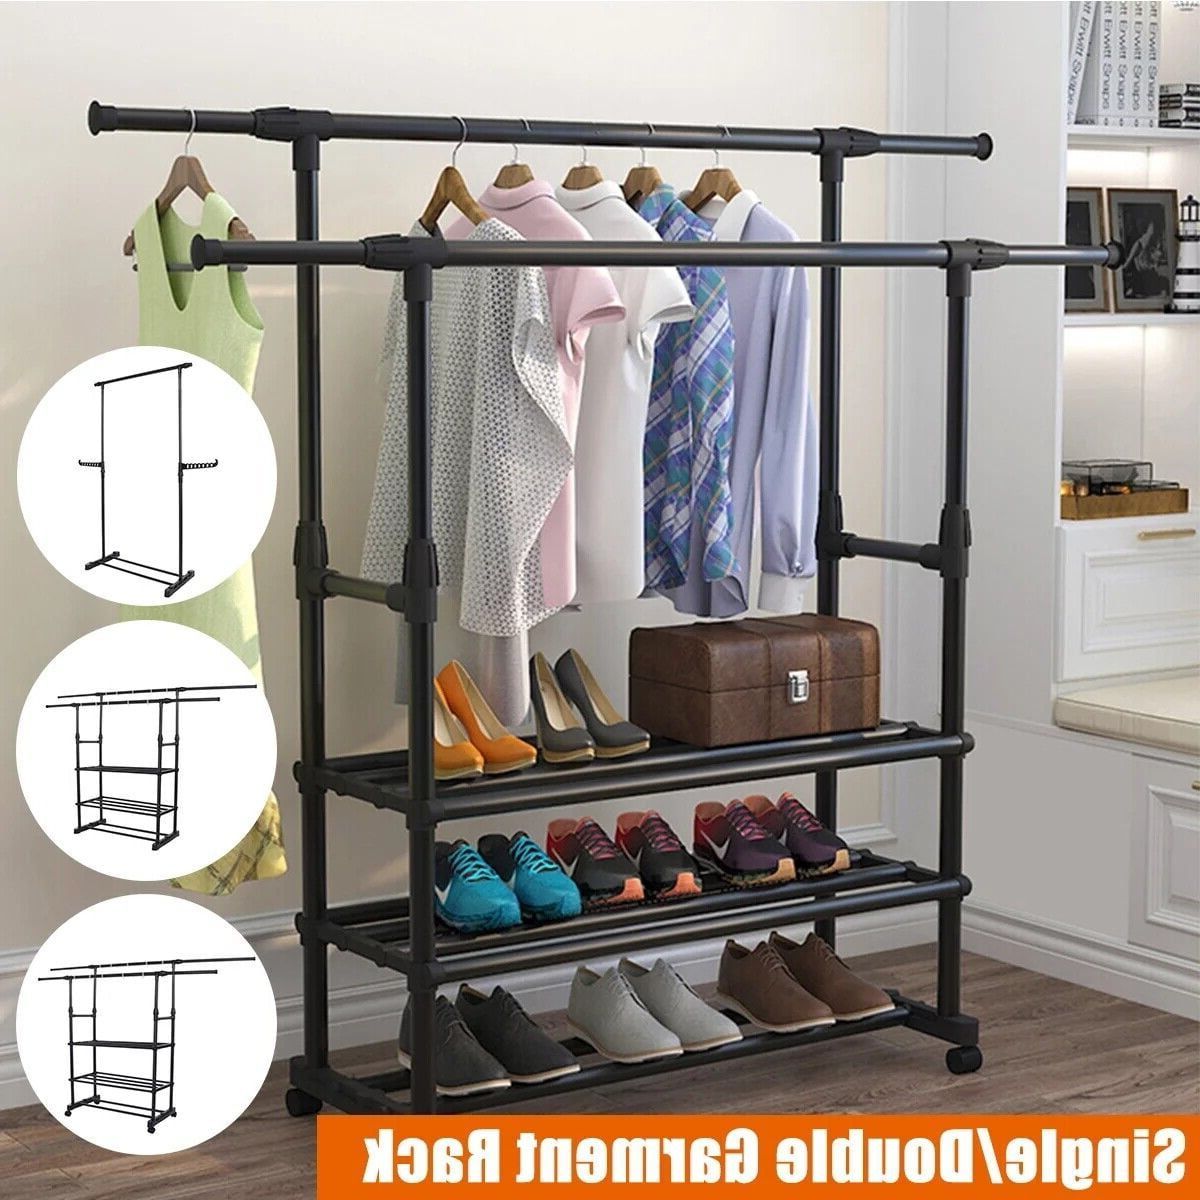 3 Tiers Double Rails Hanging Garment Rack On Wheels With Bottom Shelves For  Shoes, Rolling Clothes Rack, Clothing Rack For Hanging Clothes, Black –  Walmart With Double Up Wardrobes Rails (View 5 of 20)